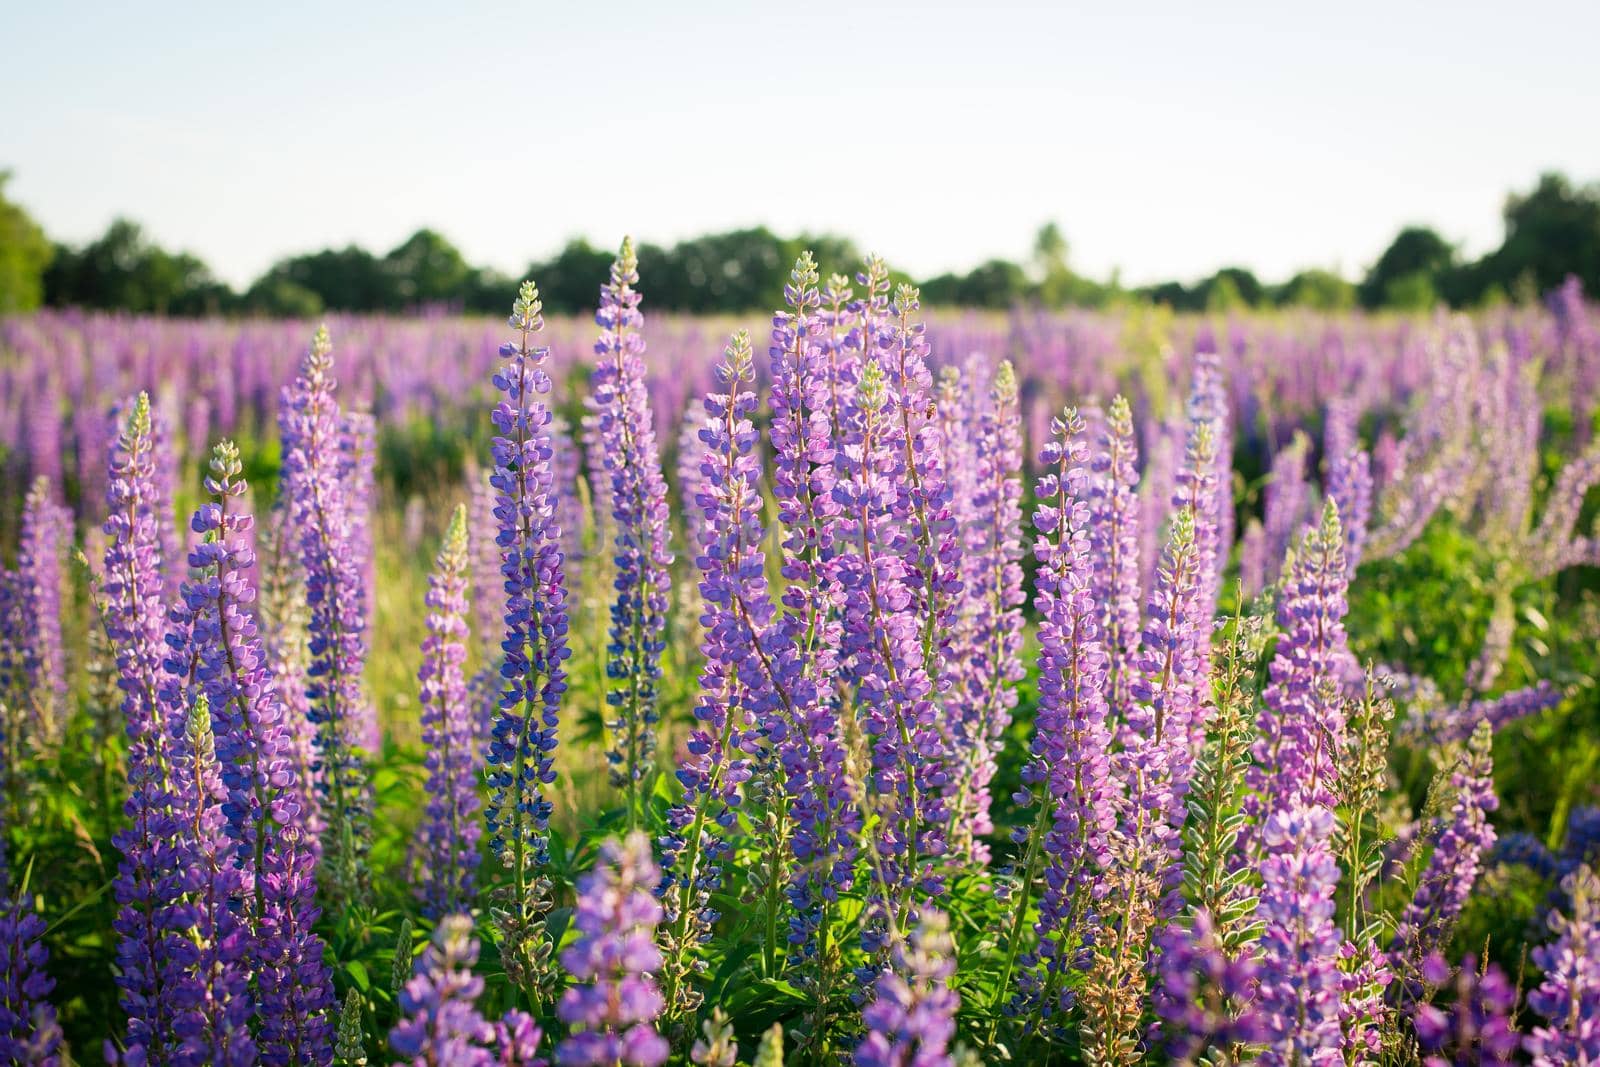 Colorful lupine flowers in field in the evening